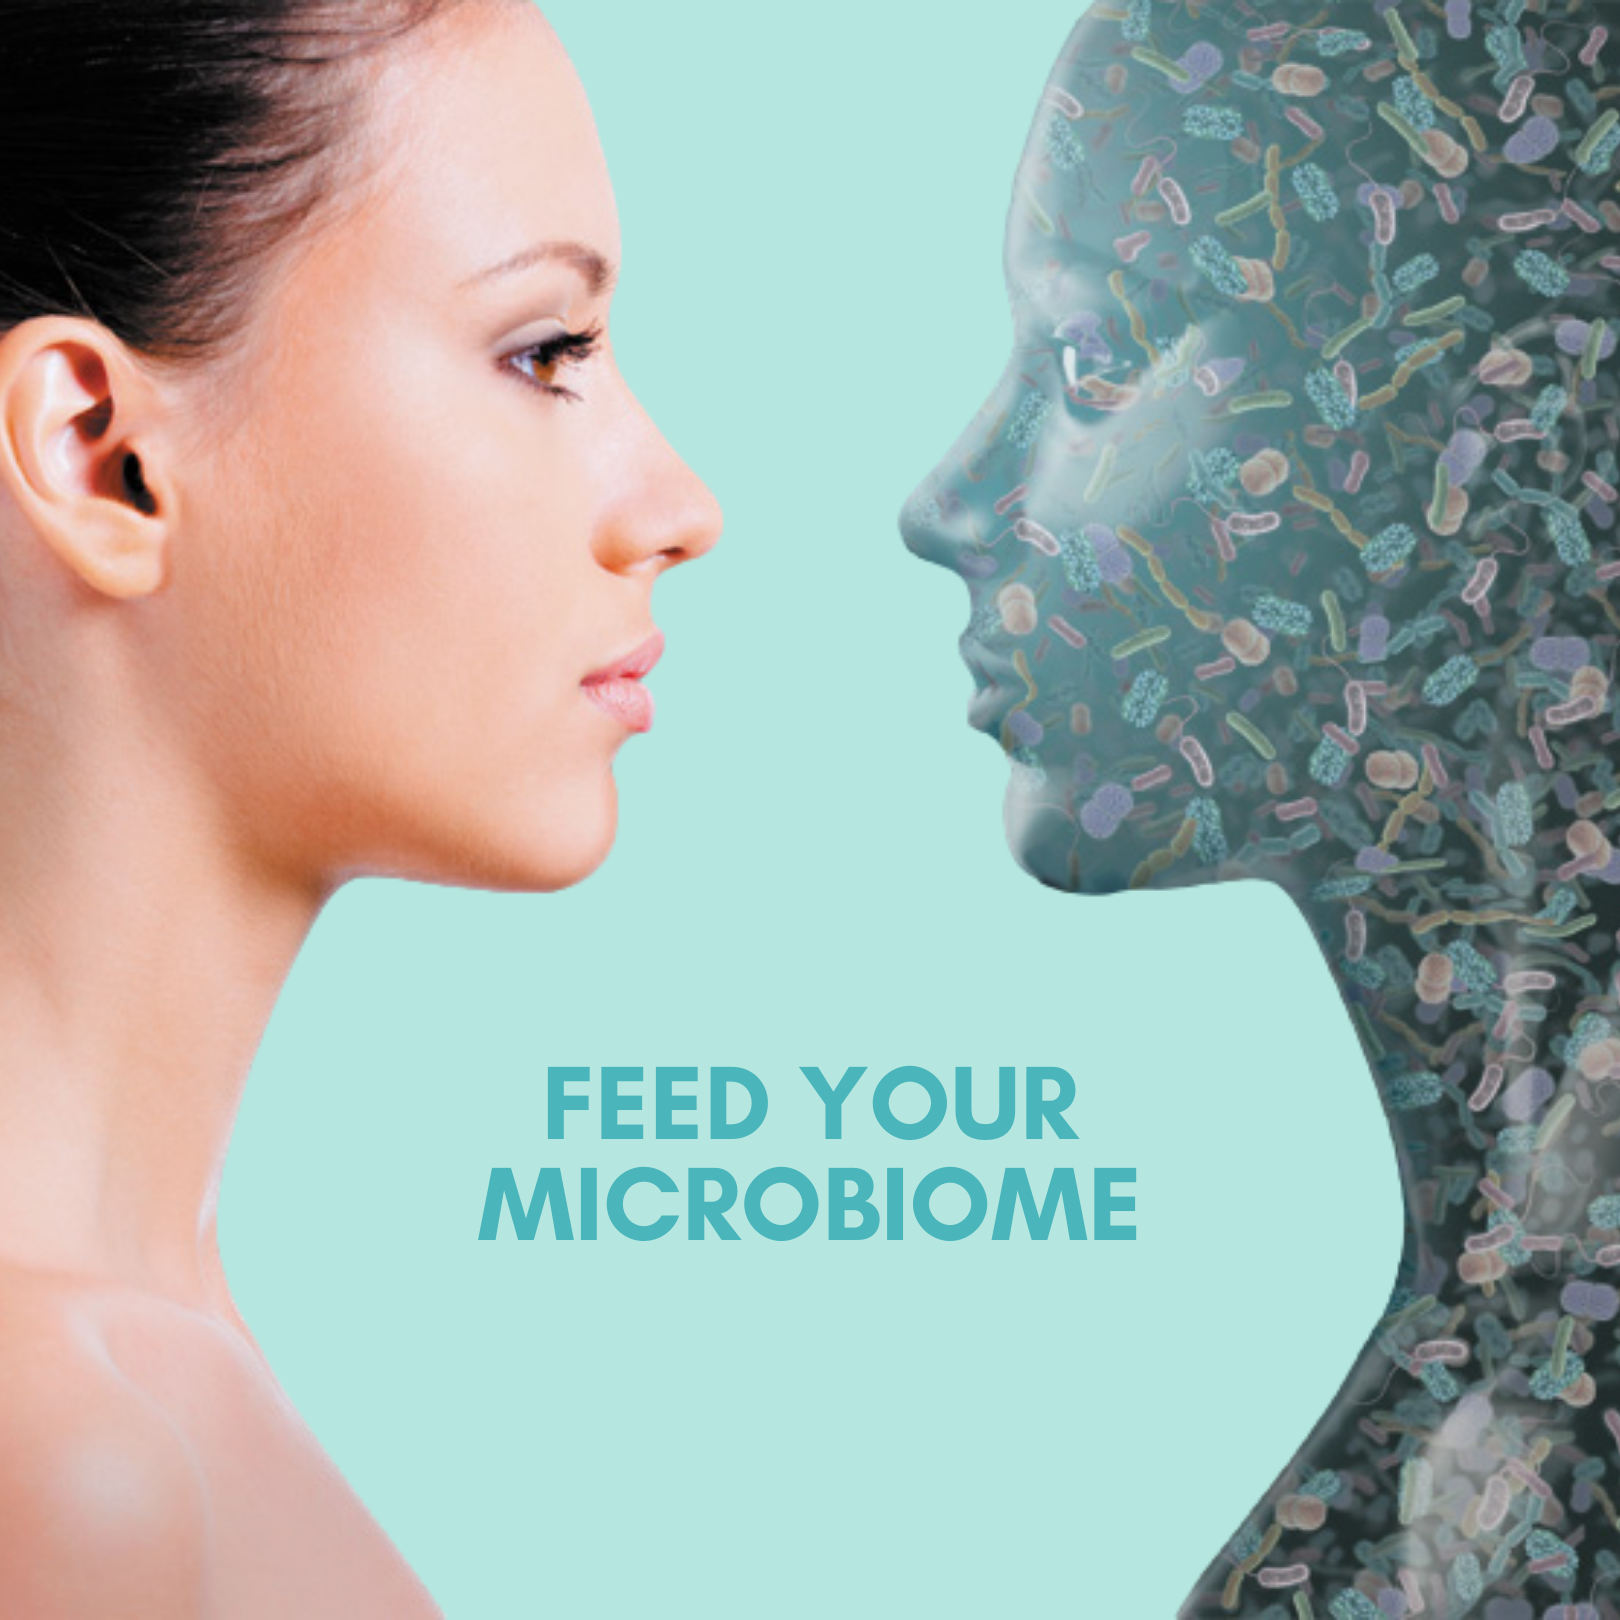 FEED YOUR MICROBIOME